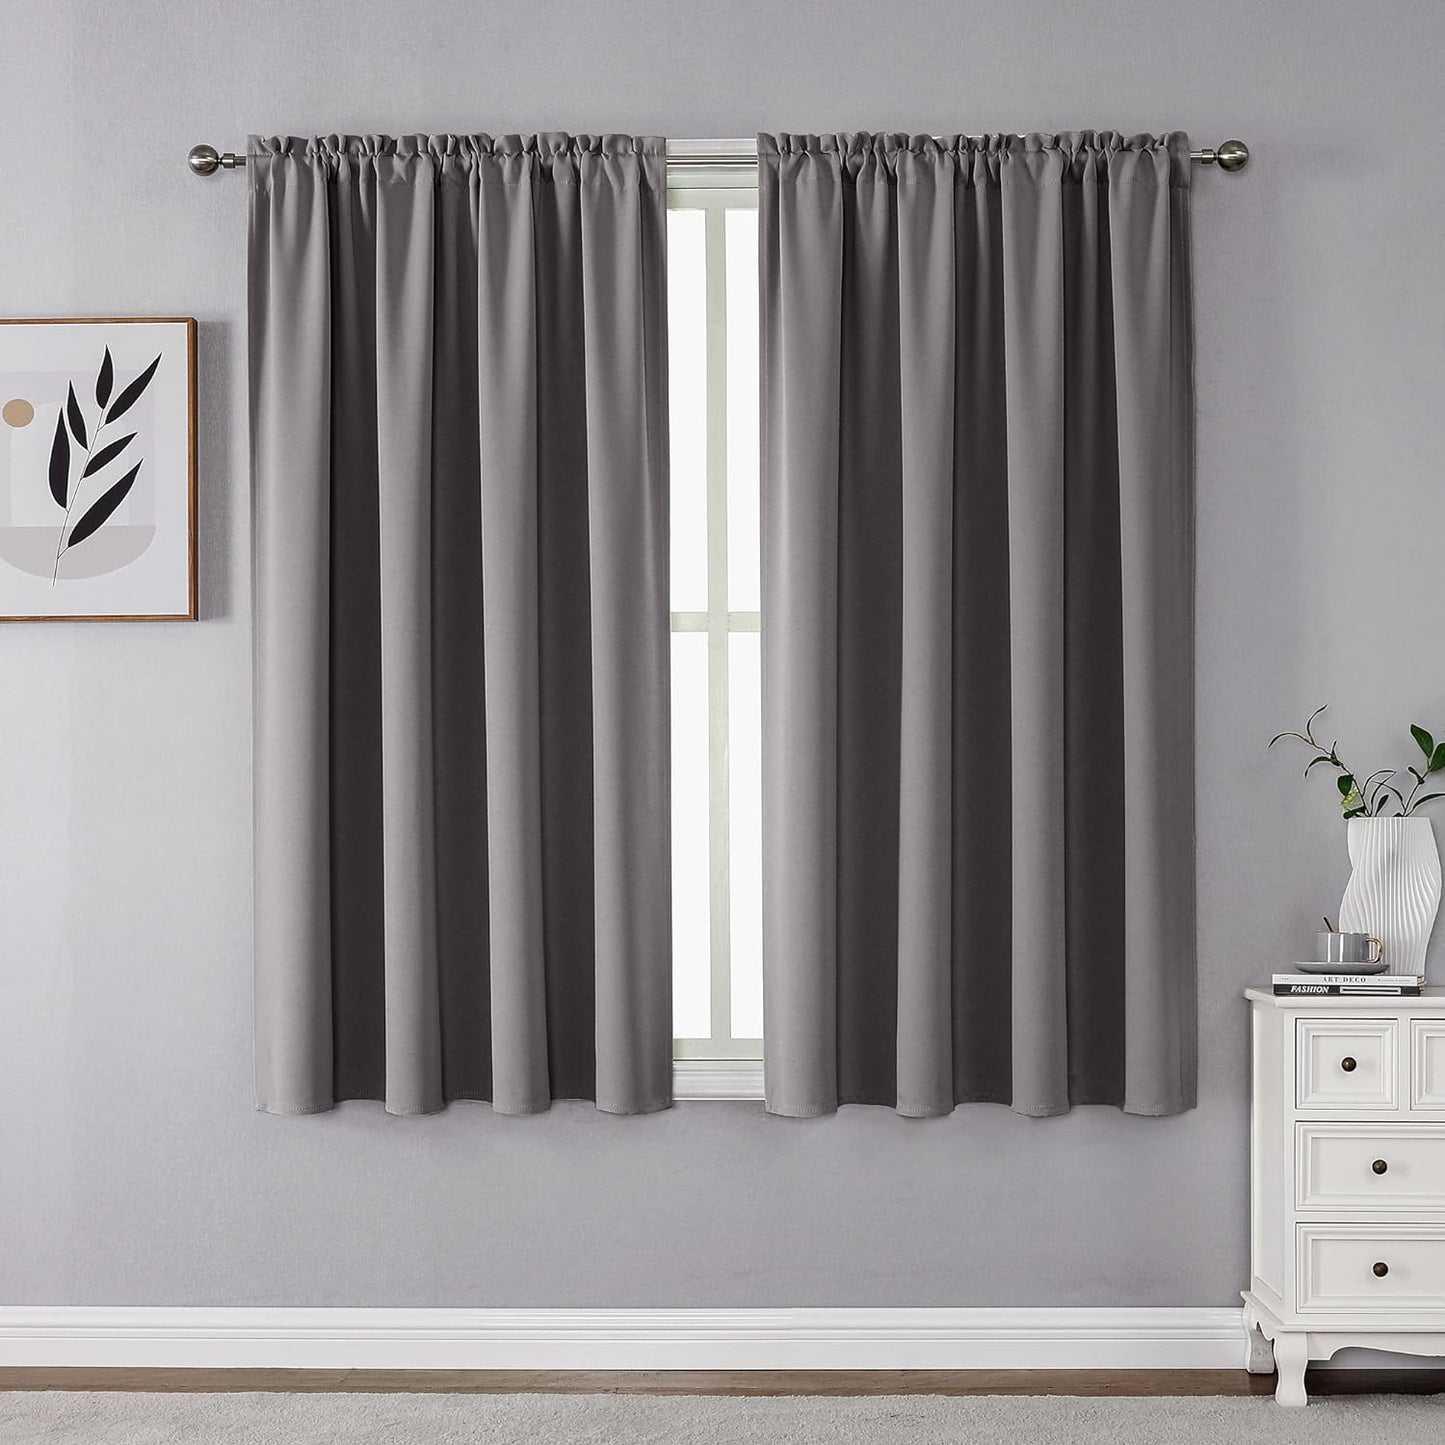 CUCRAF Blackout Curtains 84 Inches Long for Living Room, Light Beige Room Darkening Window Curtain Panels, Rod Pocket Thermal Insulated Solid Drapes for Bedroom, 52X84 Inch, Set of 2 Panels  CUCRAF Light Grey 52W X 54L Inch 2 Panels 